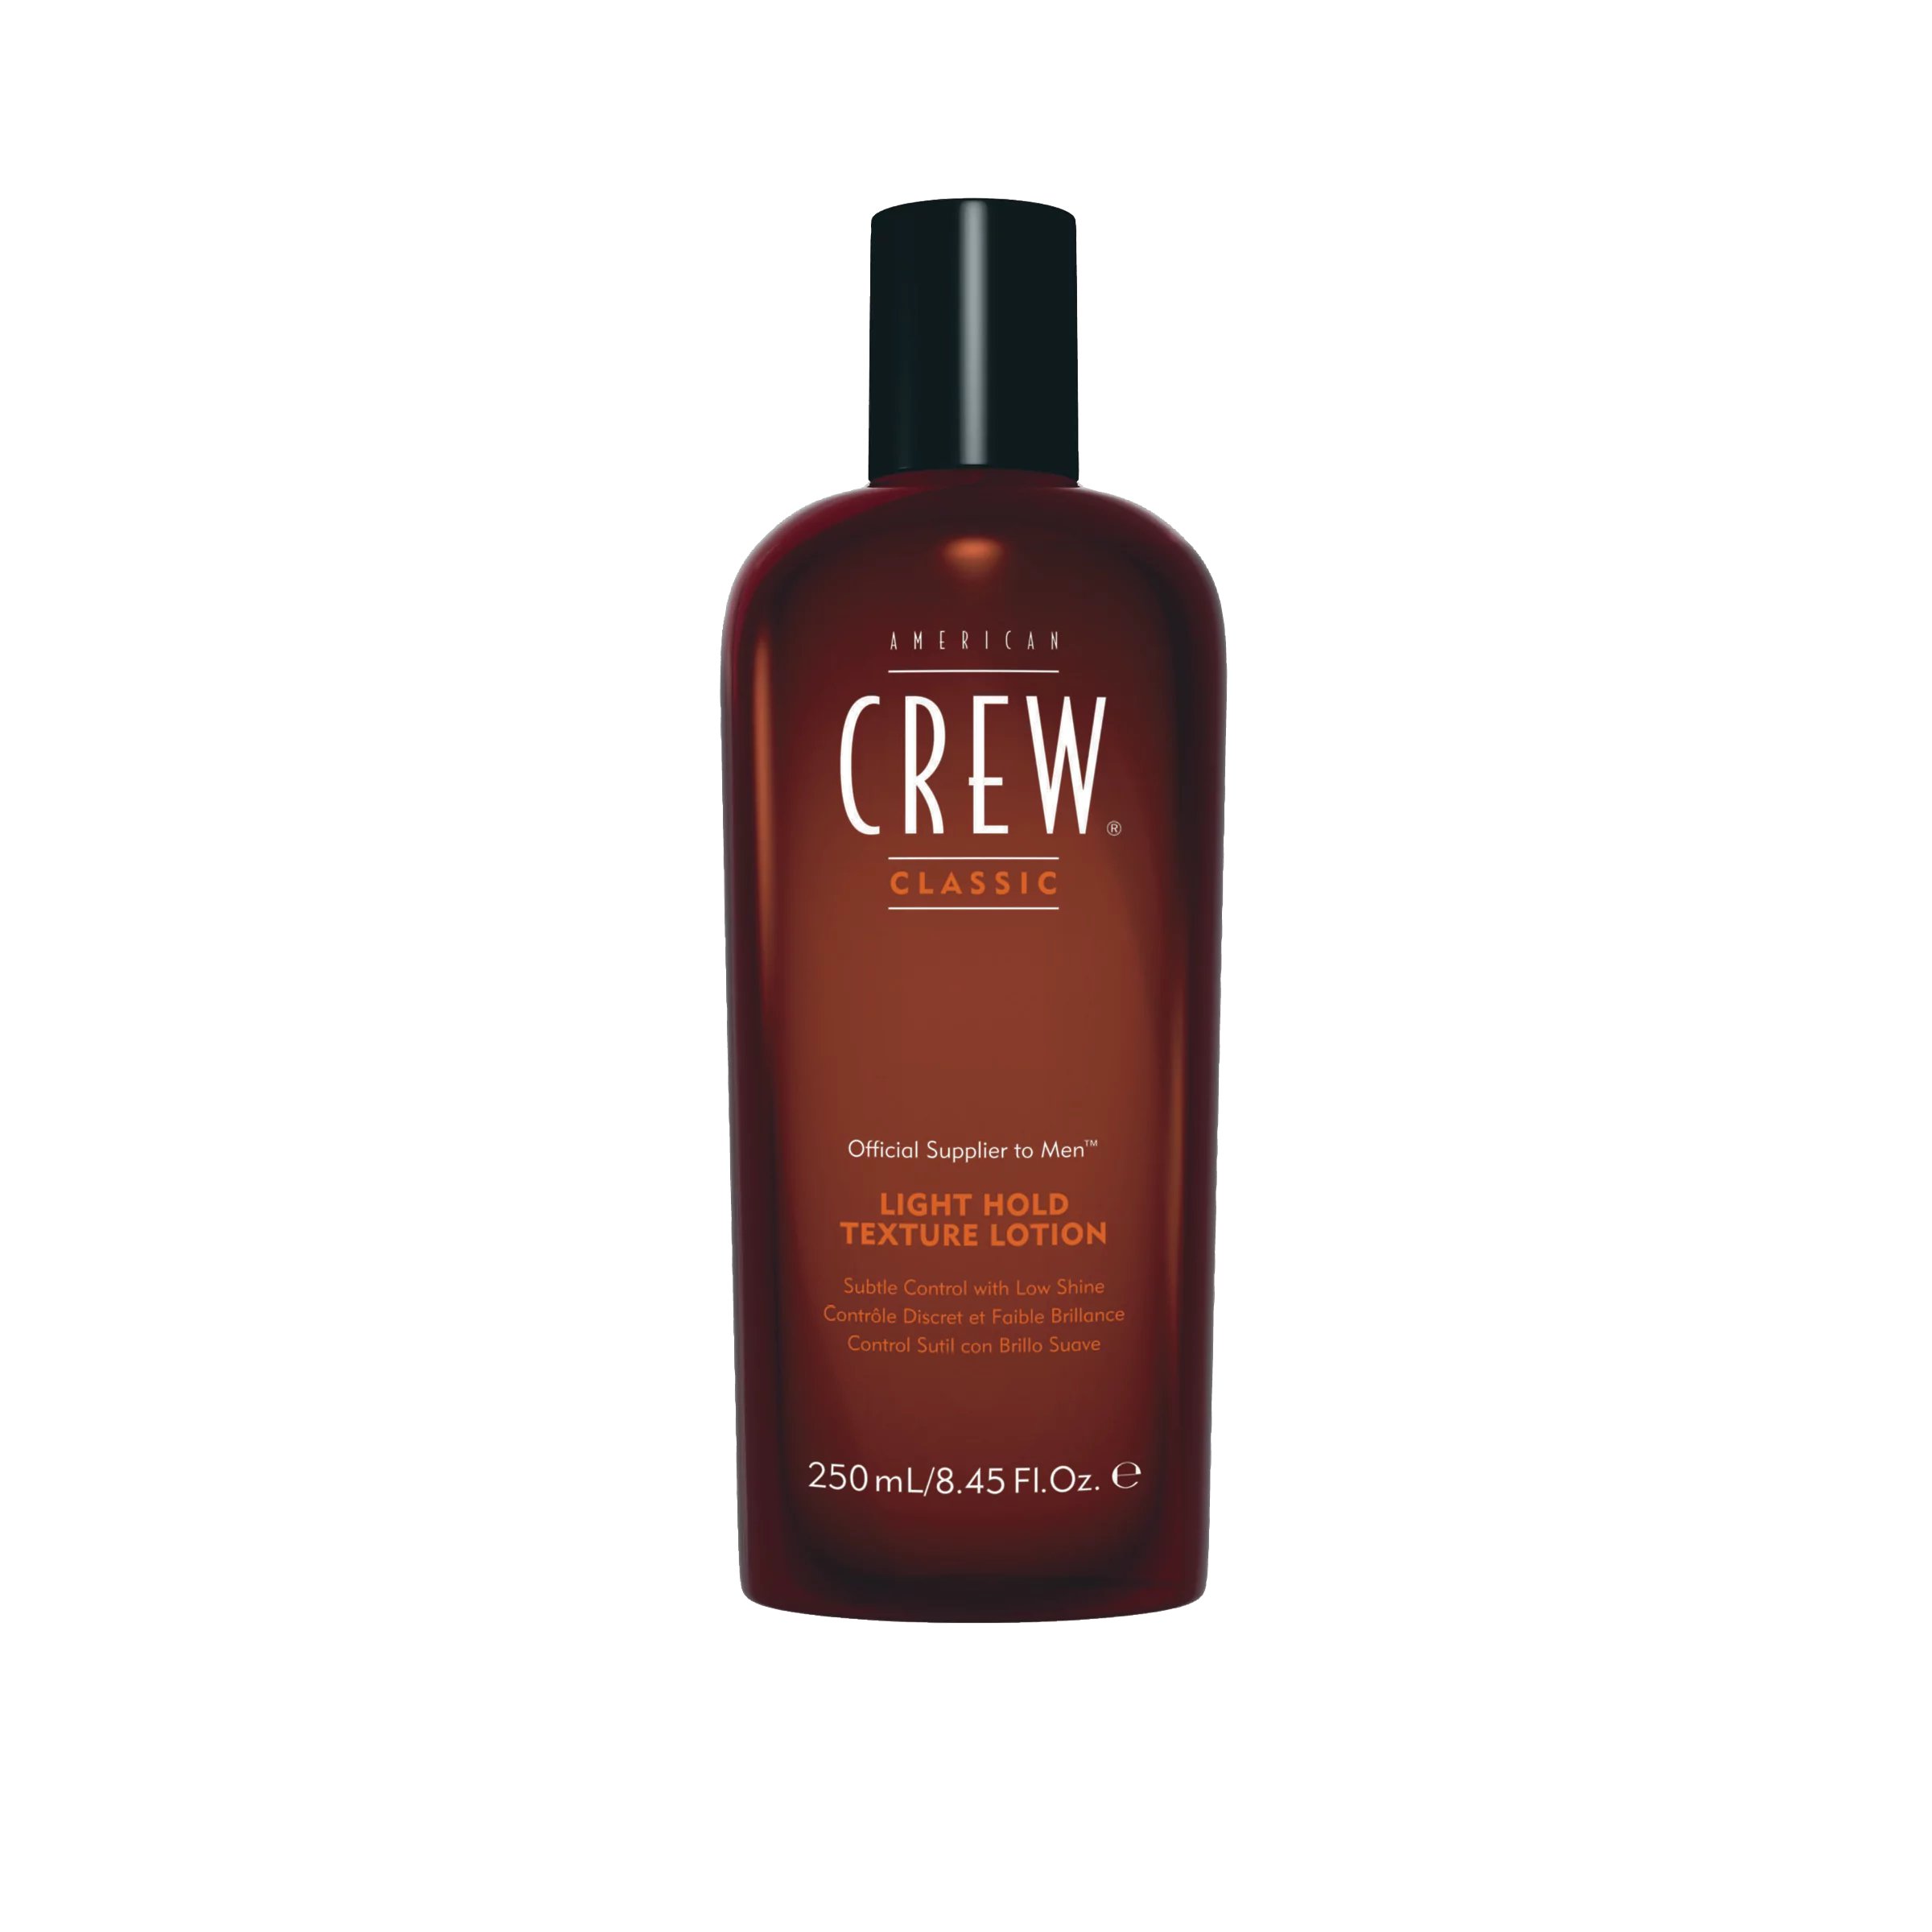 American Crew Light-Hold Texture Lotion